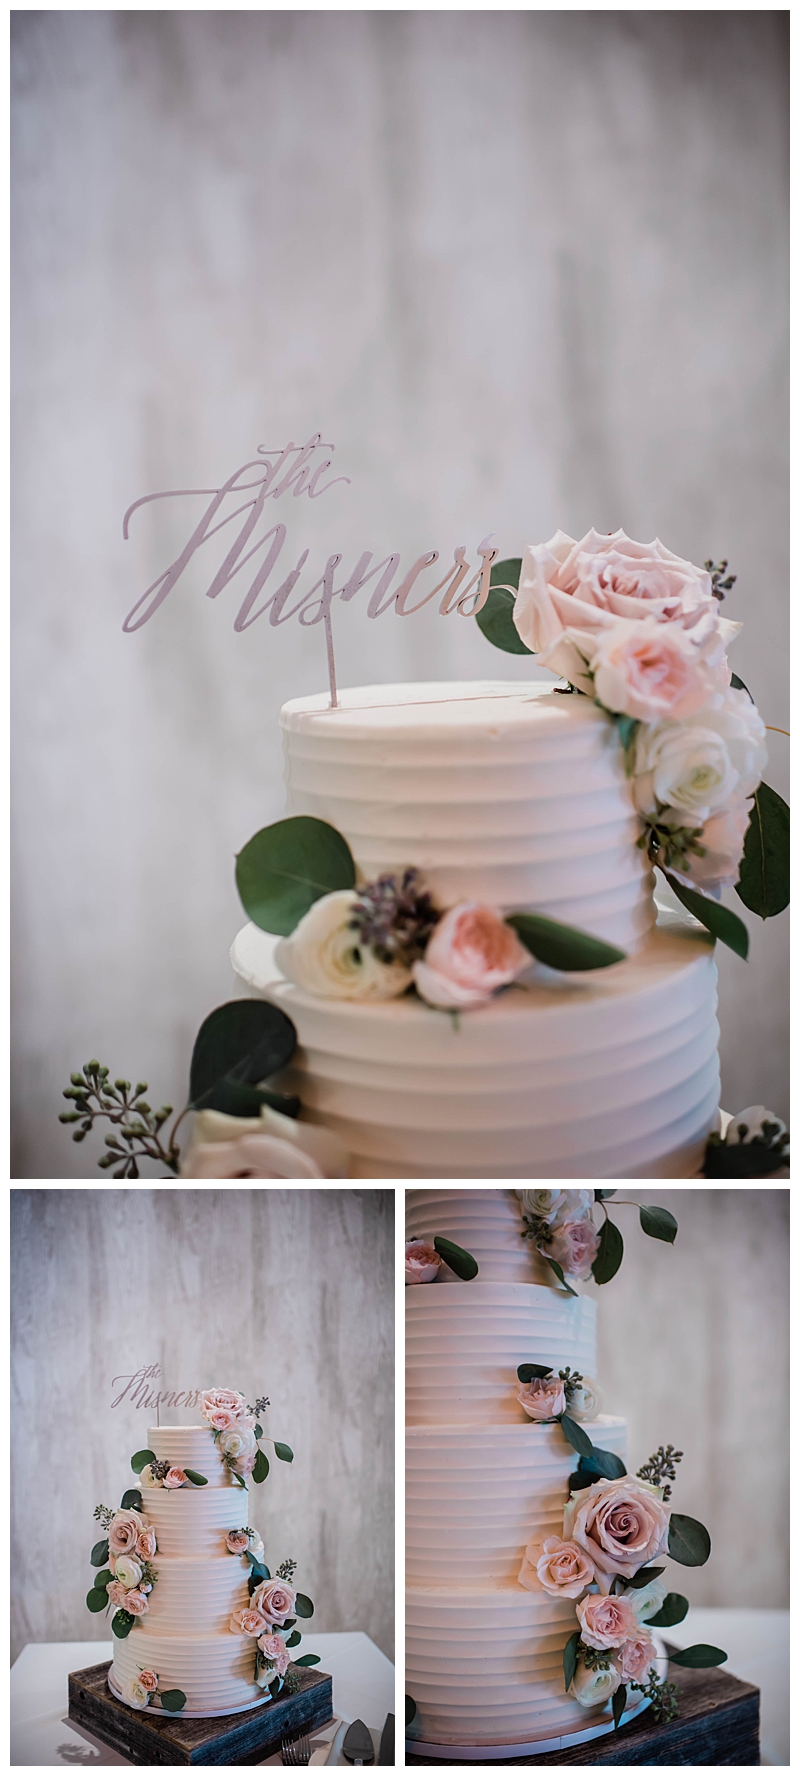 Pale blush 4 tier buttercream wedding cake with pale pink and white florals and eucalyptus detailing